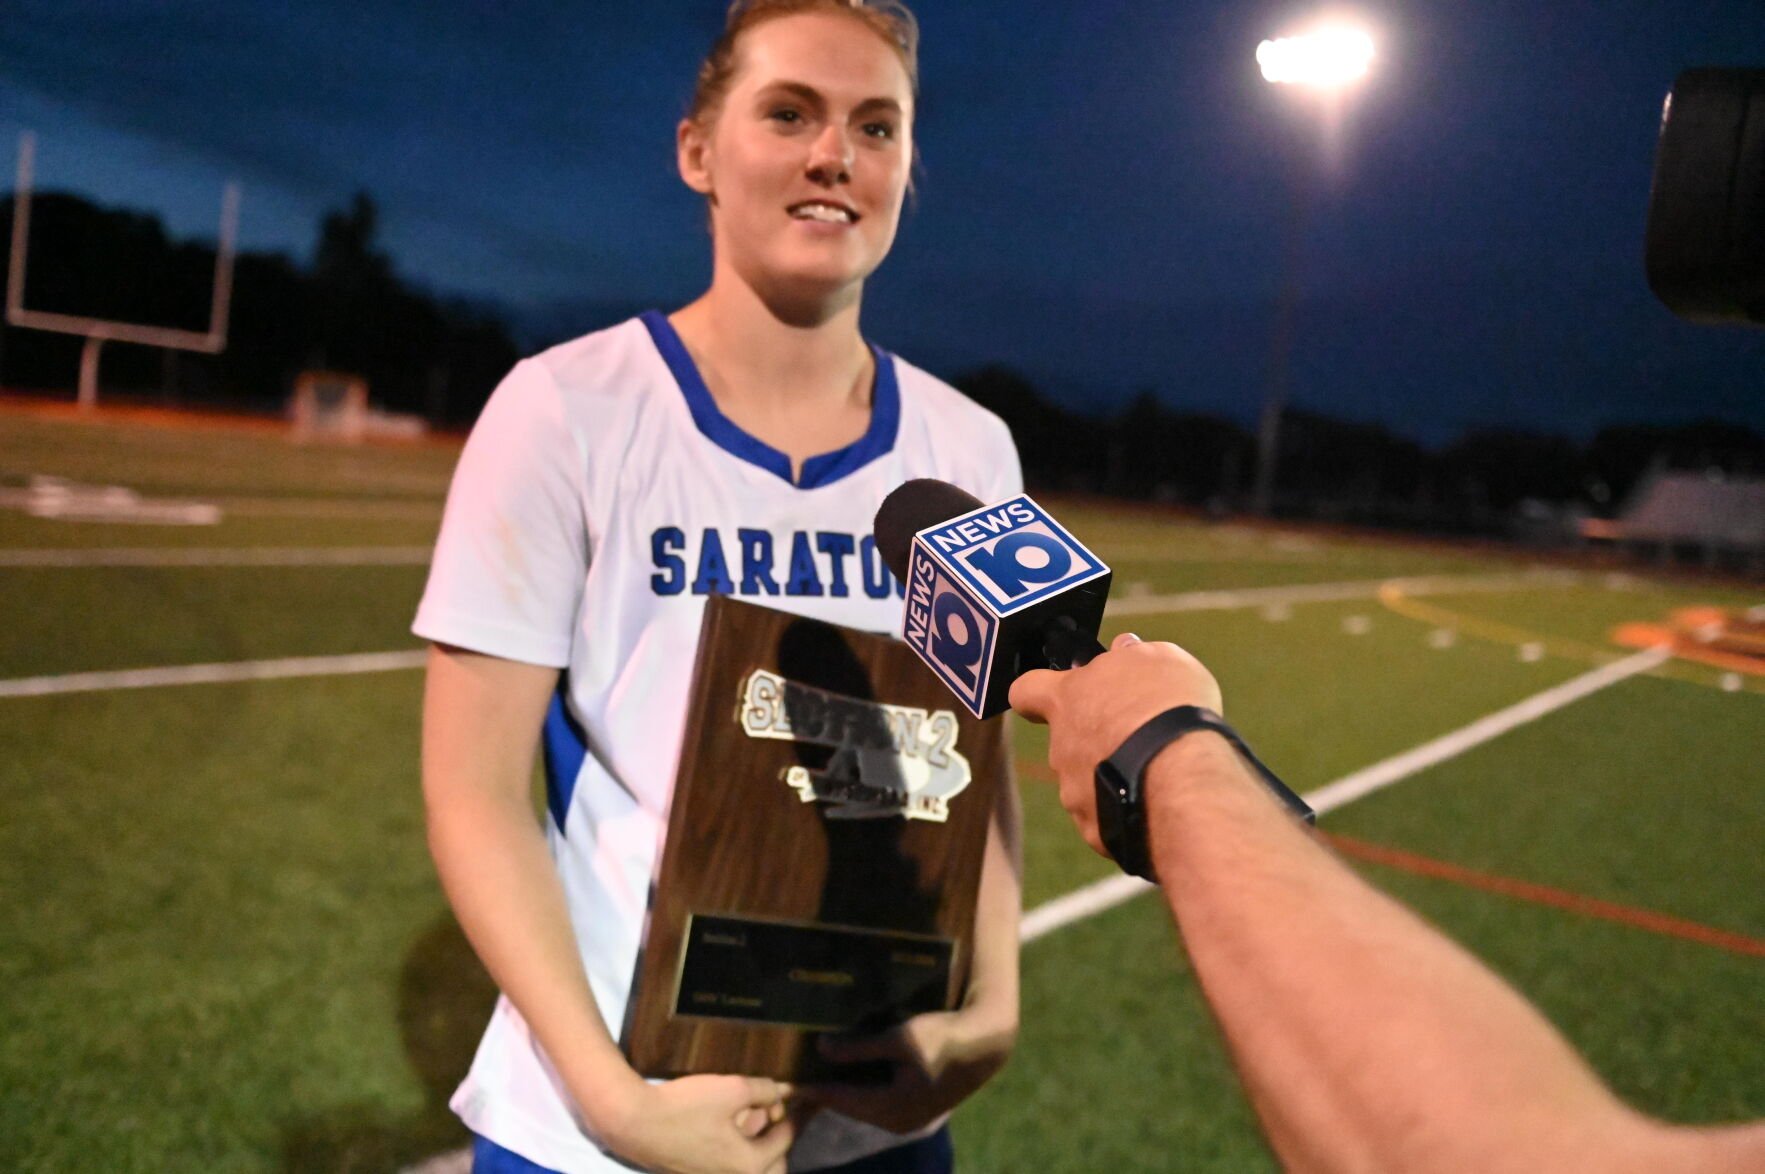 Saratoga Springs Defeated by Suffern in NYSPHSAA Girls’ Lacrosse Regional Championship